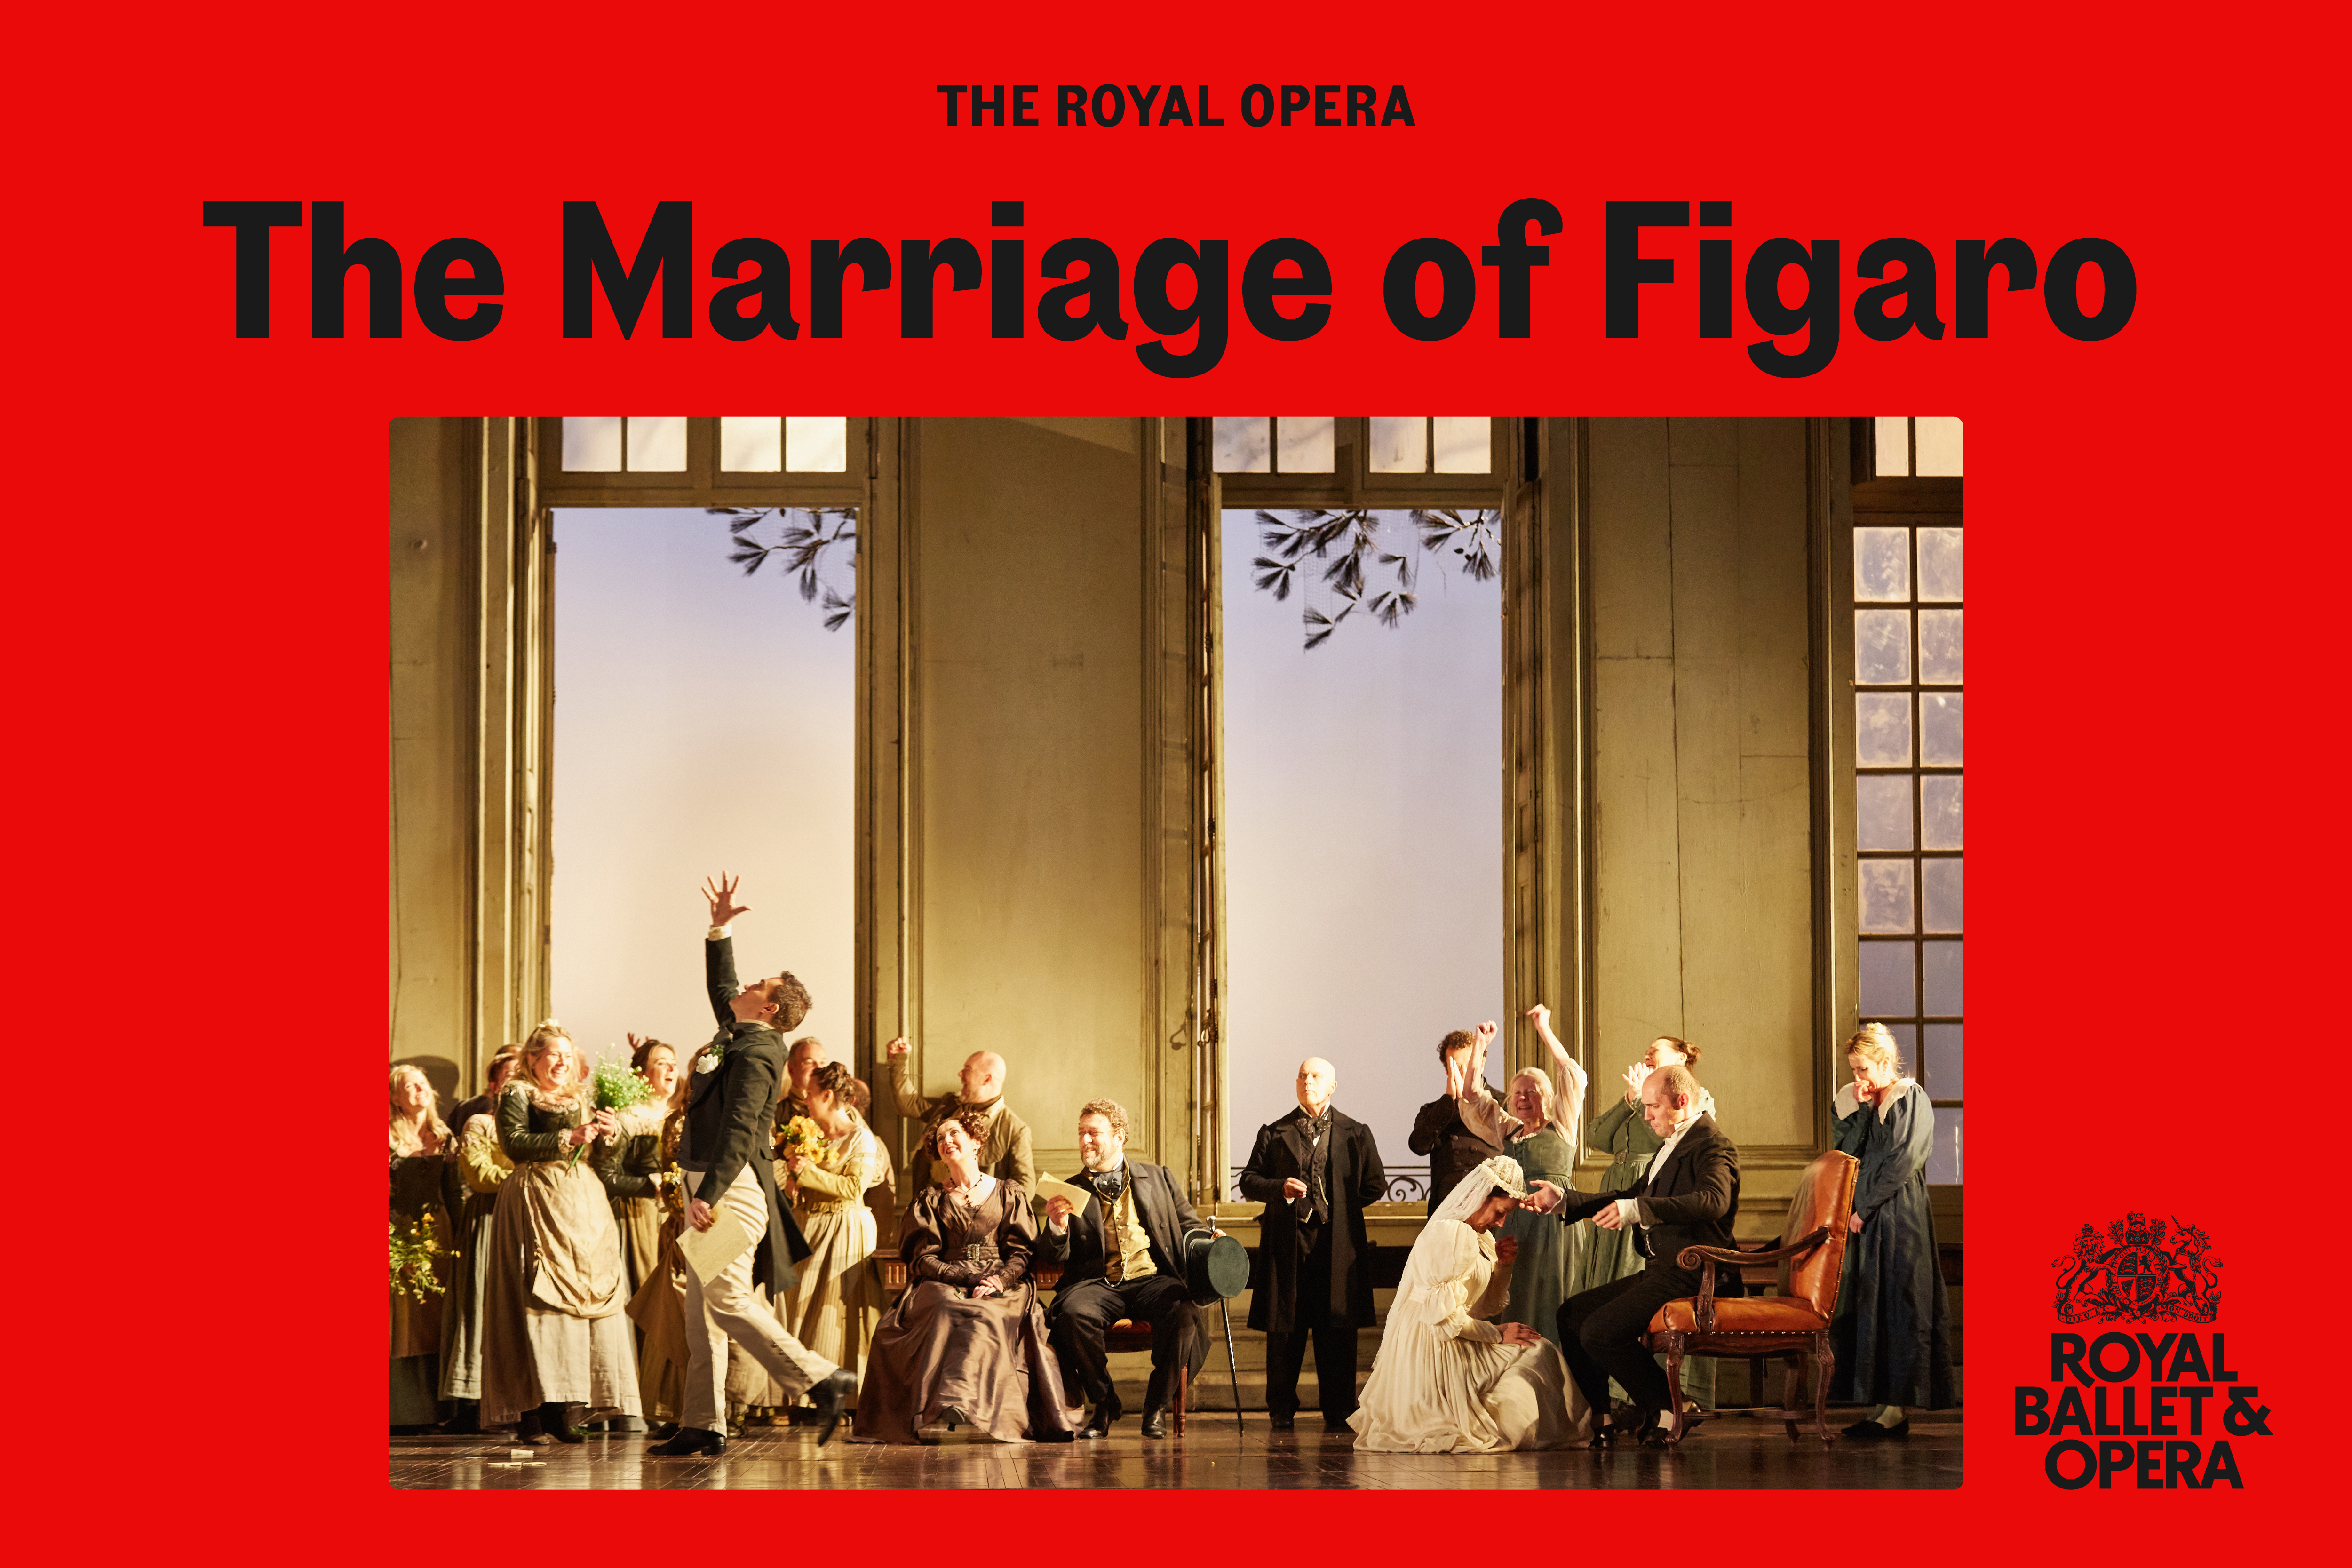 Image representing The Royal Ballet & Opera House Live present The Marriage of Figaro - A live screening of Mozart's comic opera conducted by Julia Jones from The Astor Theatre